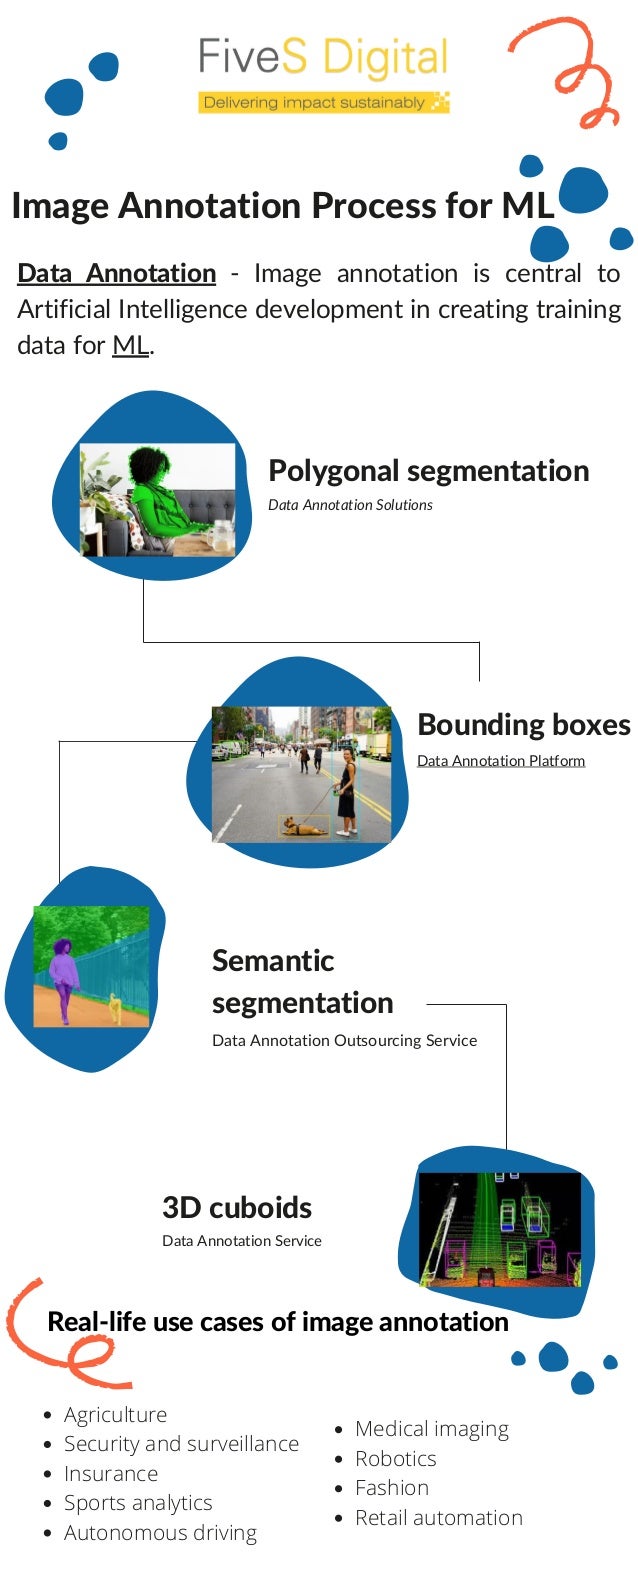 Data Annotation Outsourcing Service
Semantic
segmentation
Bounding boxes
Data Annotation Platform
3D cuboids
Data Annotation Service
Polygonal segmentation
Data Annotation Solutions
Image Annotation Process for ML
Data Annotation - Image annotation is central to
Artificial Intelligence development in creating training
data for ML.
Real-life use cases of image annotation
Agriculture
Security and surveillance
Insurance
Sports analytics
Autonomous driving
Medical imaging
Robotics
Fashion
Retail automation
 